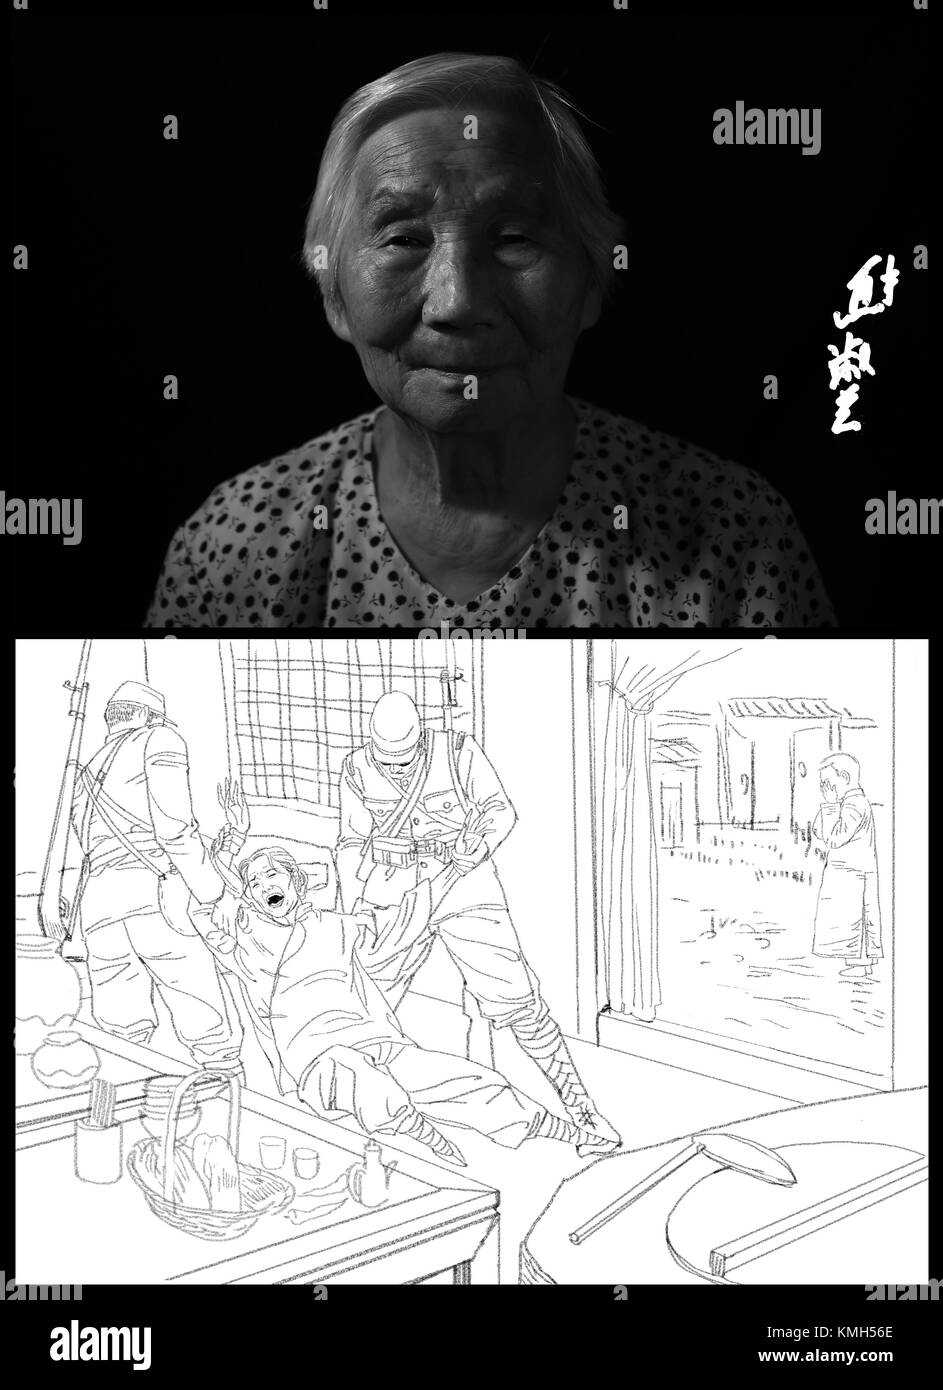 Nanjing, China. 10th Dec, 2017. (171210) -- NANJING, Dec. 10, 2017 (Xinhua) -- The combo picture shows the portrait, signature of Xiong Shulan and illustrated story reviving her tragedy based on facts.  Born on Sept. 14, 1931, Xiong is a survivor of Nanjing Massacre, a heinous crime committed by the Japanese militarists during World War II in 1937, in Nanjing, then capital of China. After Nanjing being occupied by the invaders, Xiong's aunt was raped by Japanese in turn. Her uncle was murdered shortly after. She witnessed Japanese troops using tons of dead bodies to fill up the ditch under a d Stock Photo